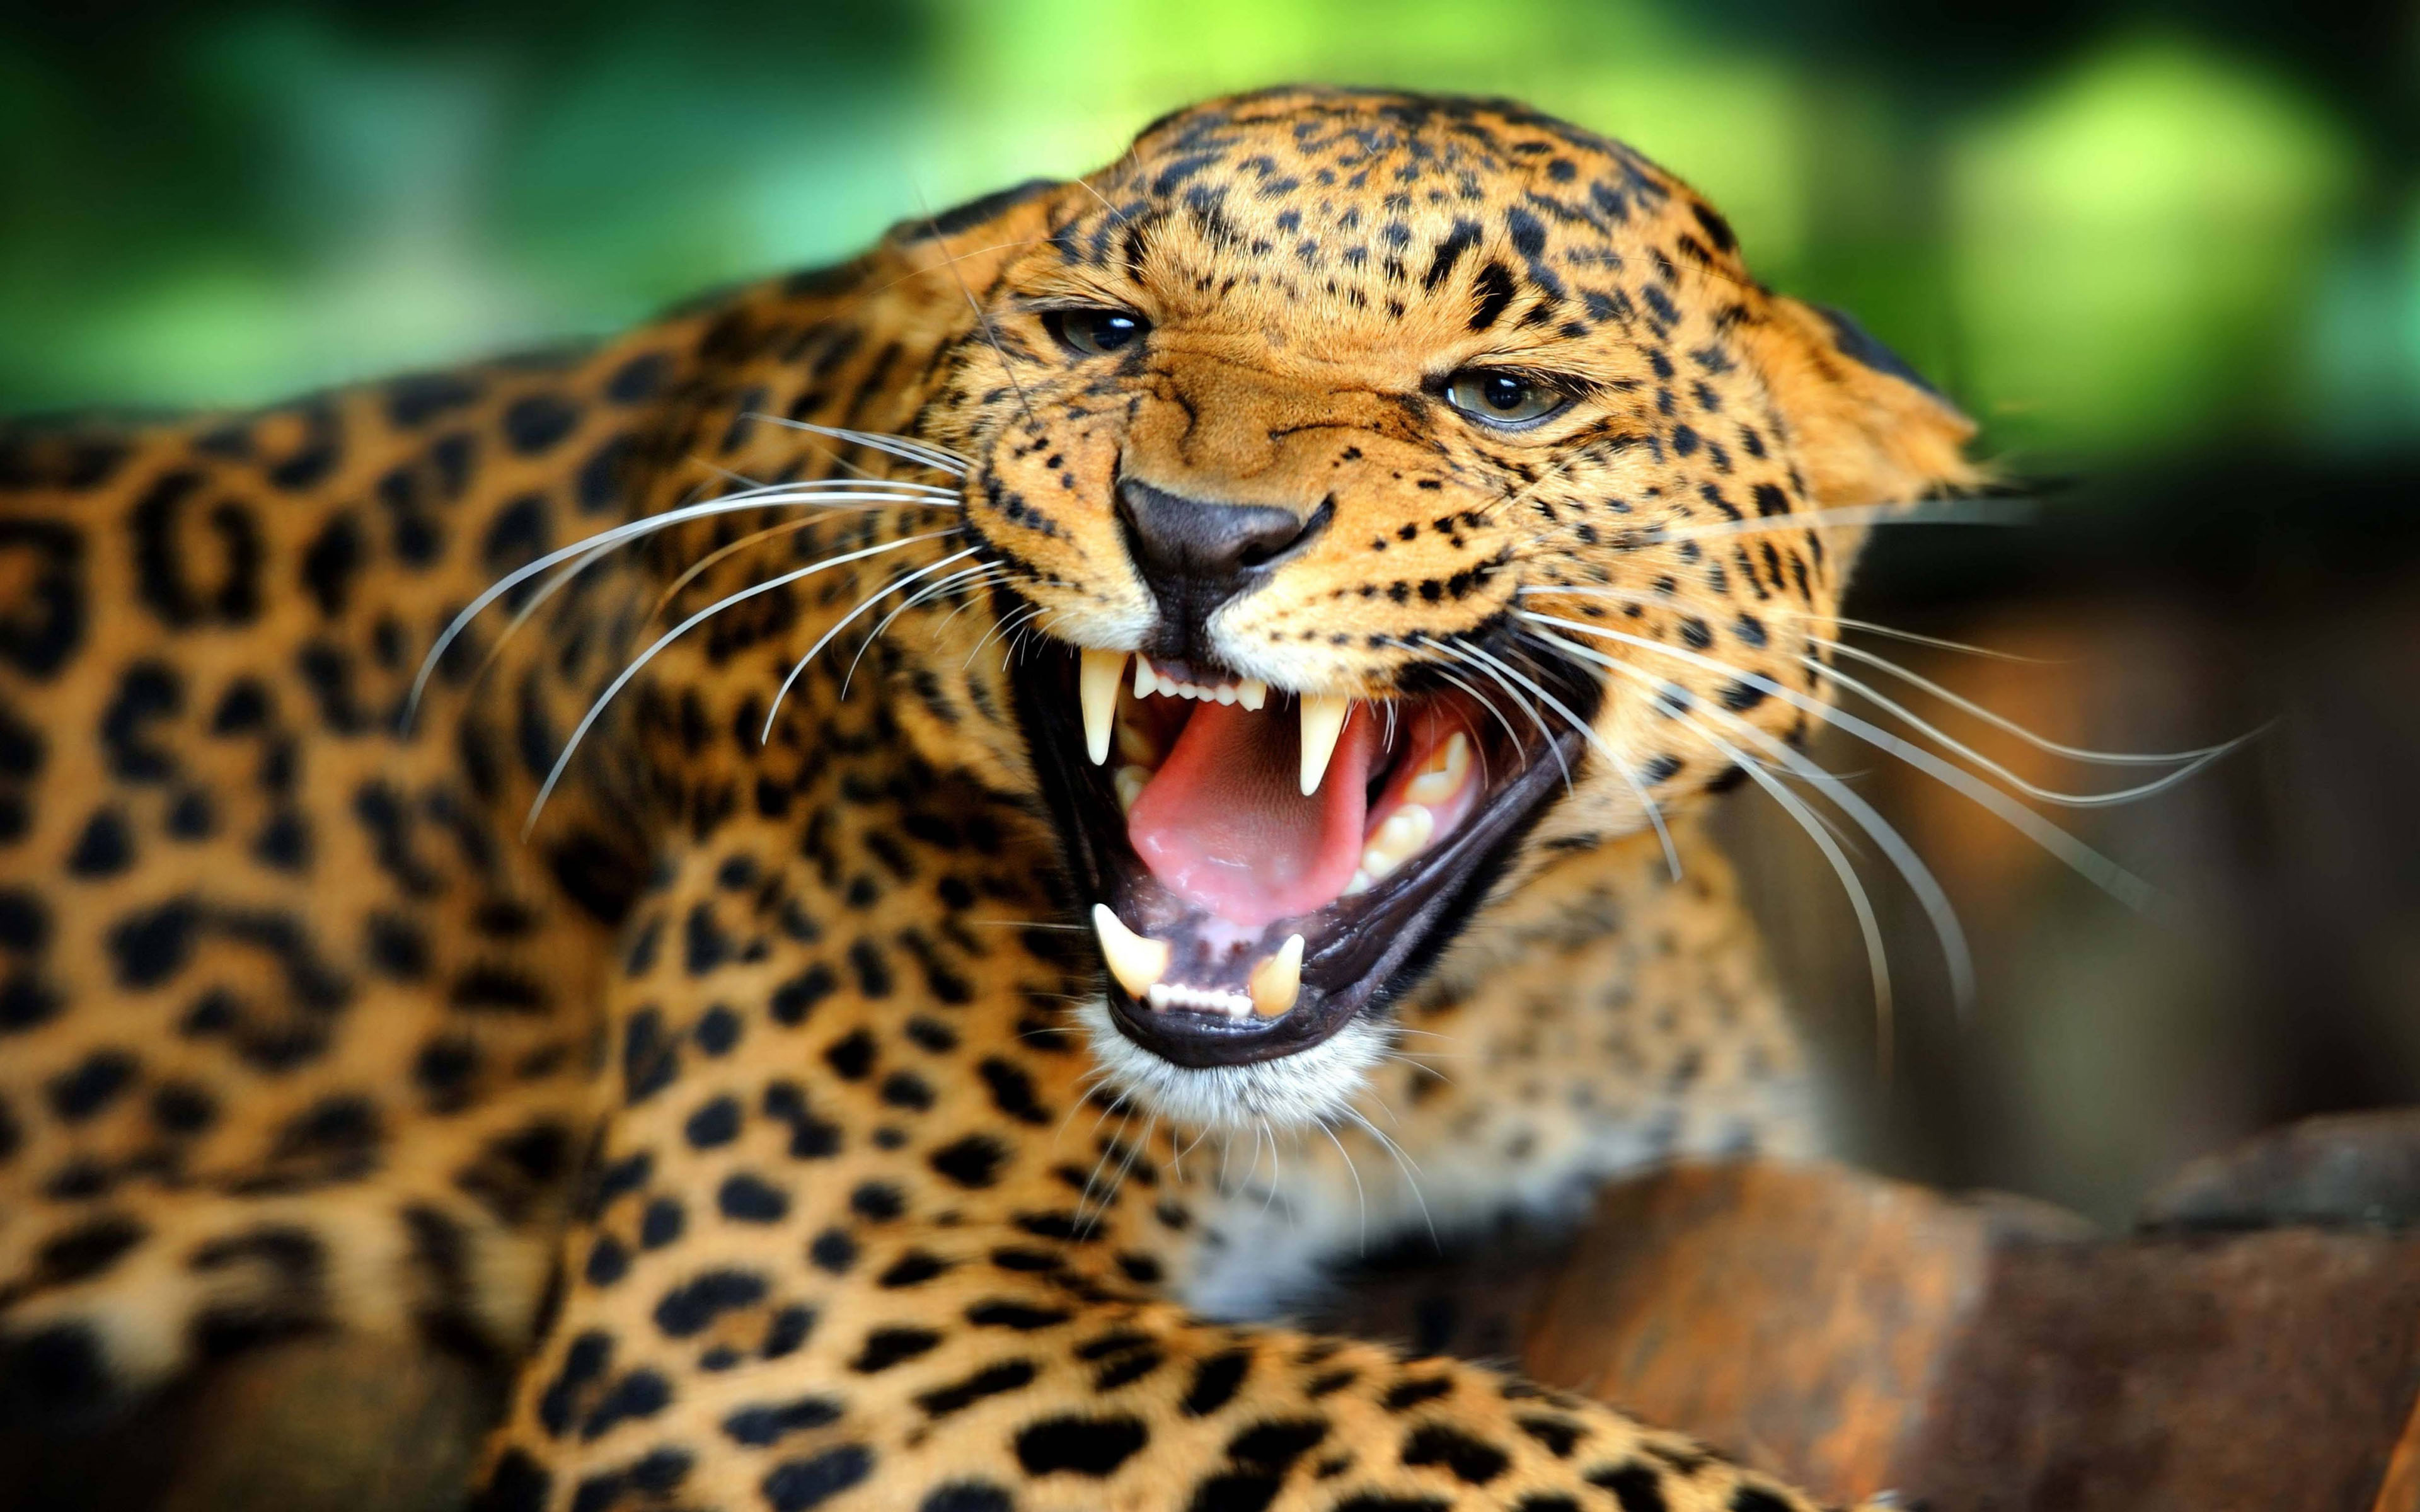 Angry Leopard Shows Sharp Teeth Hd Wallpaper : Wallpapers13.com